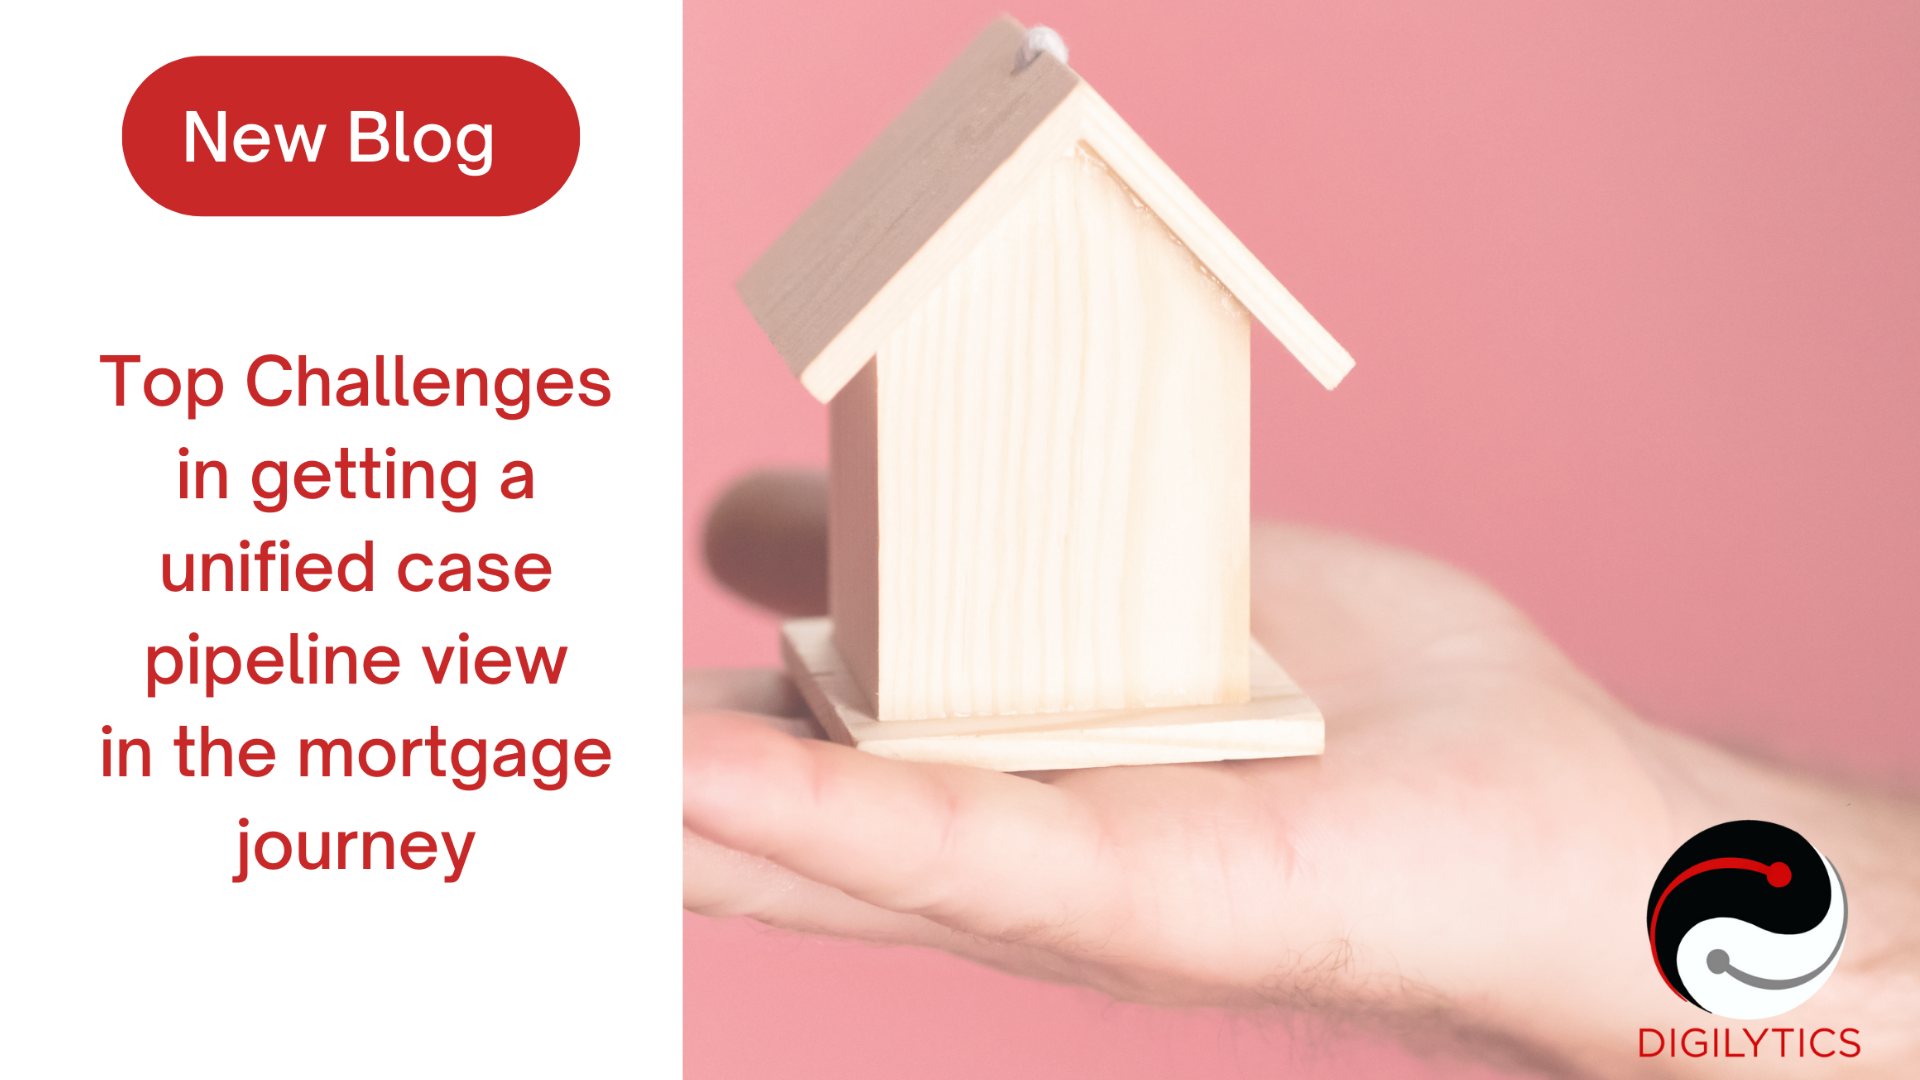 Top 5 Challenges in getting a unified case pipeline view in the mortgage journey